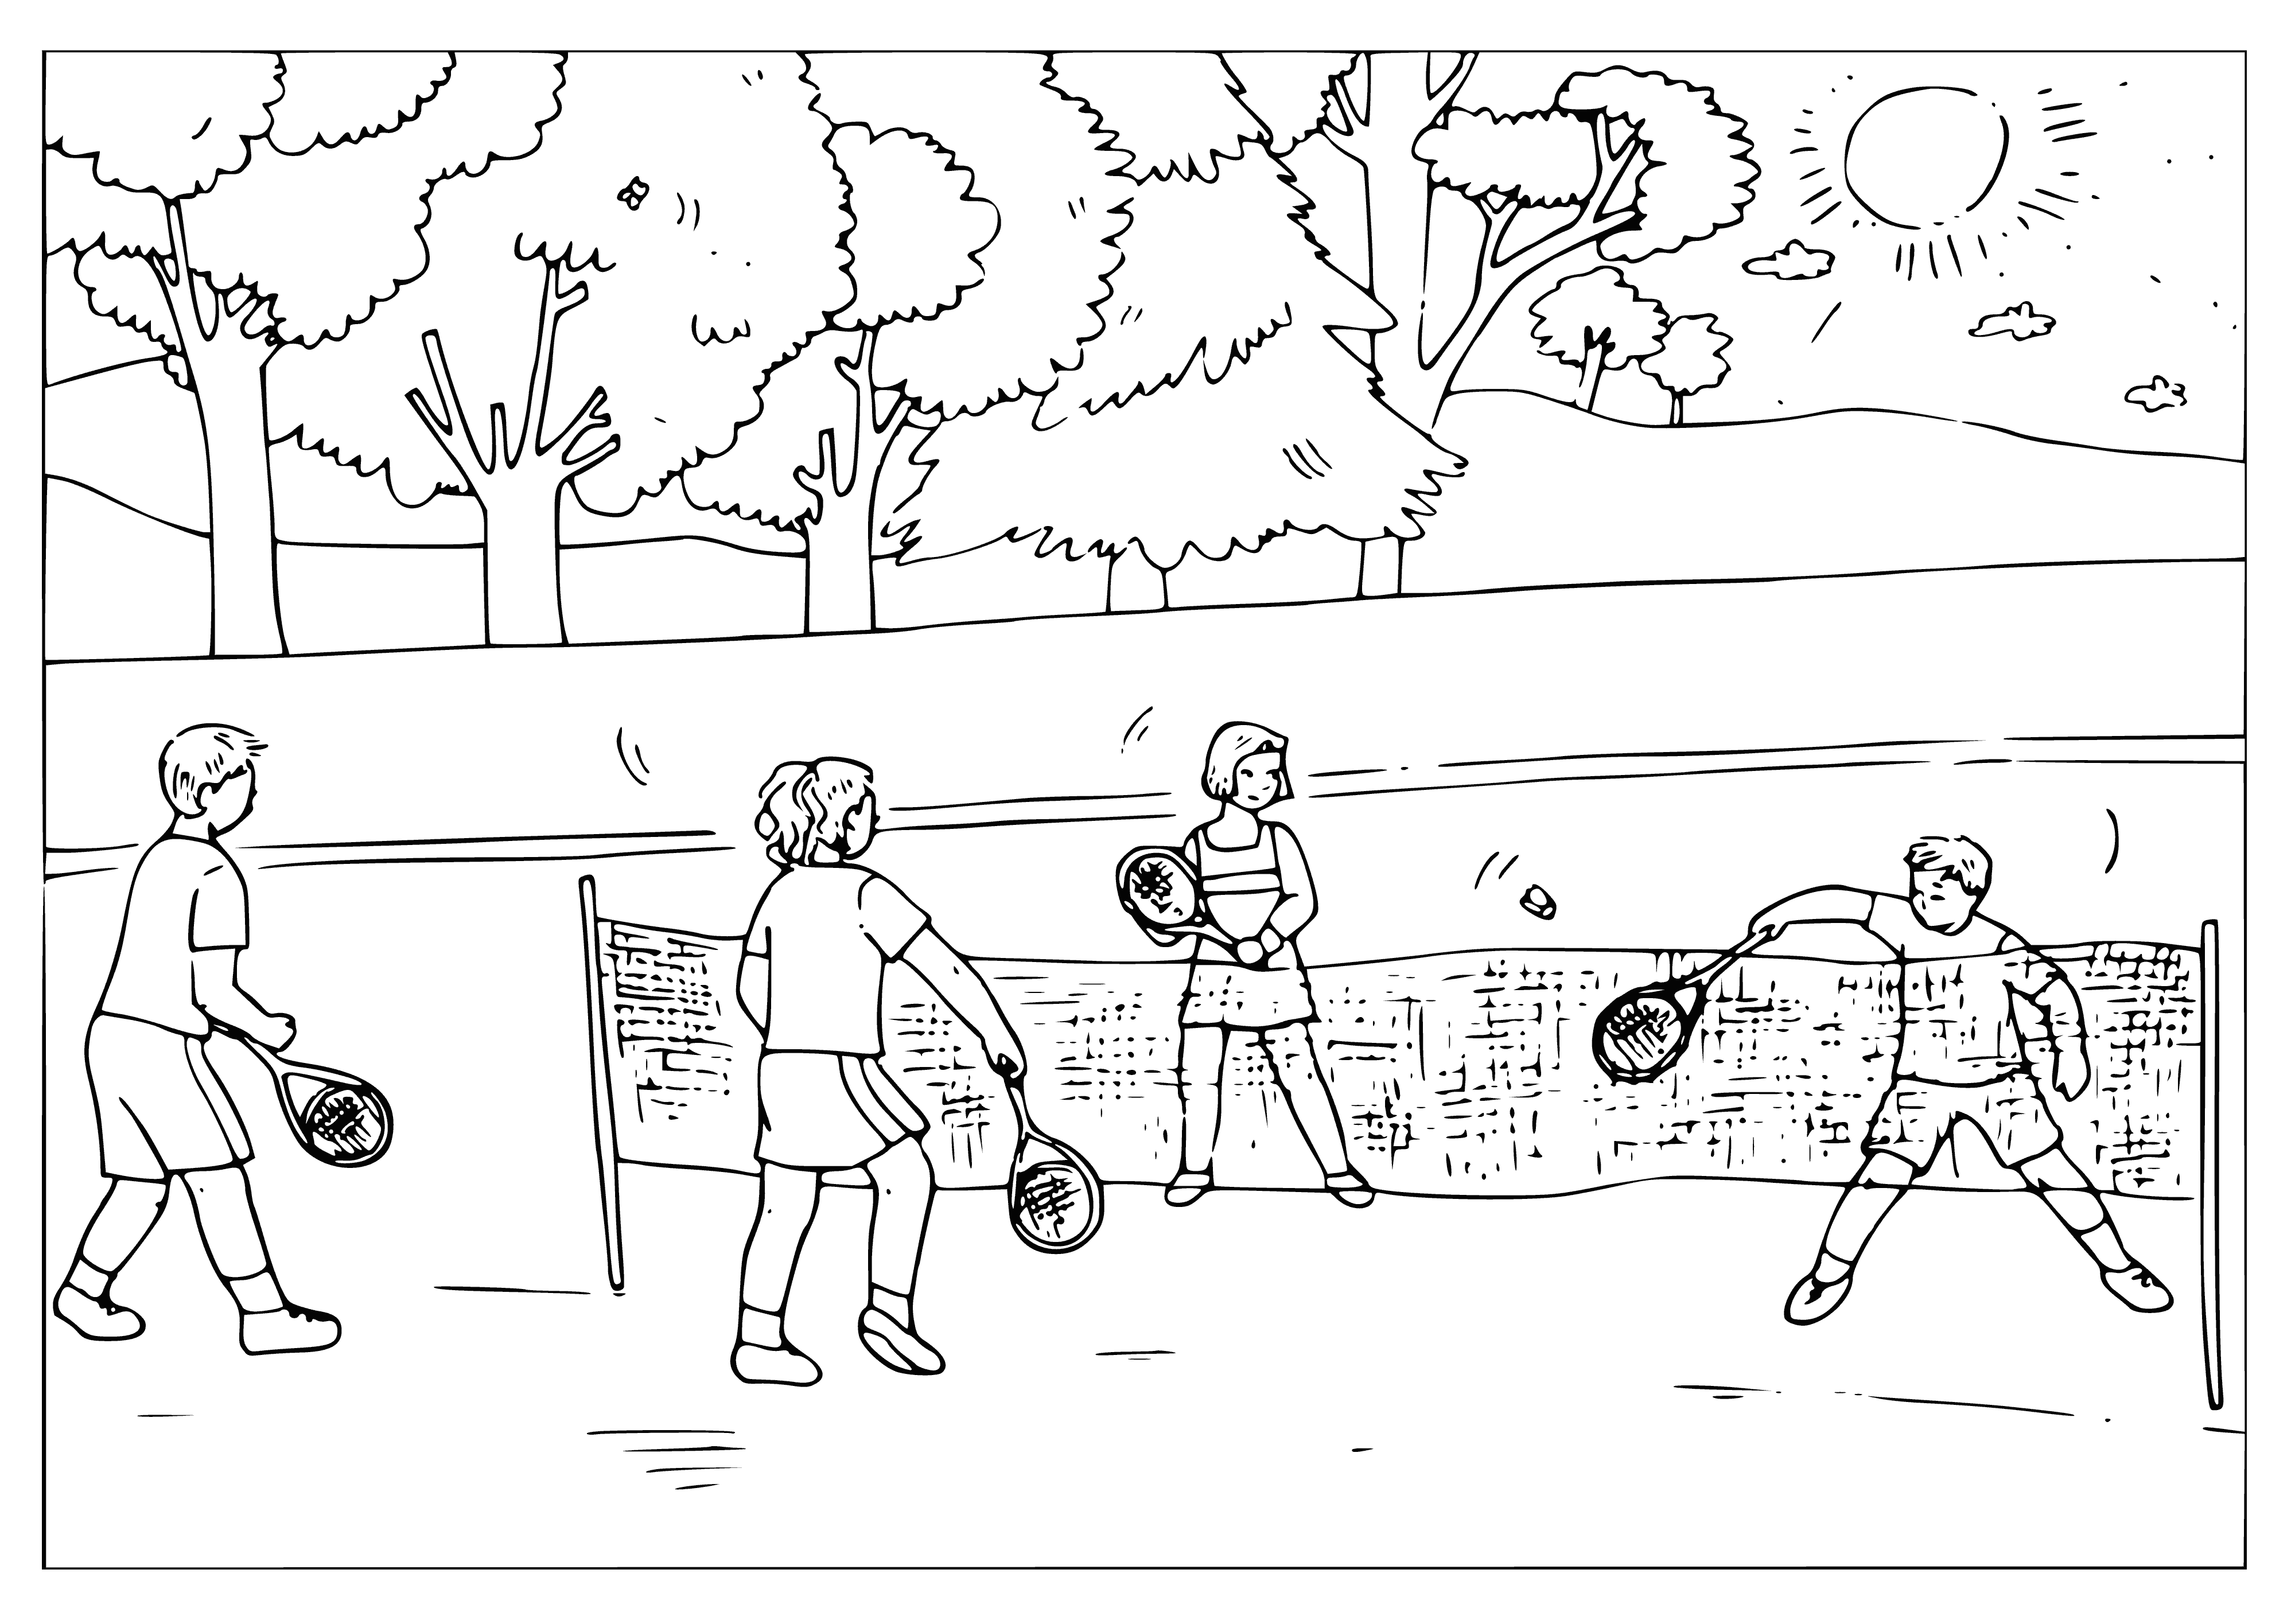 coloring page: Girl plays tennis in summer sun, wearing white dress/pink visor & boy wearing blue shorts/white shirt. Having a great time! #SummerVibes